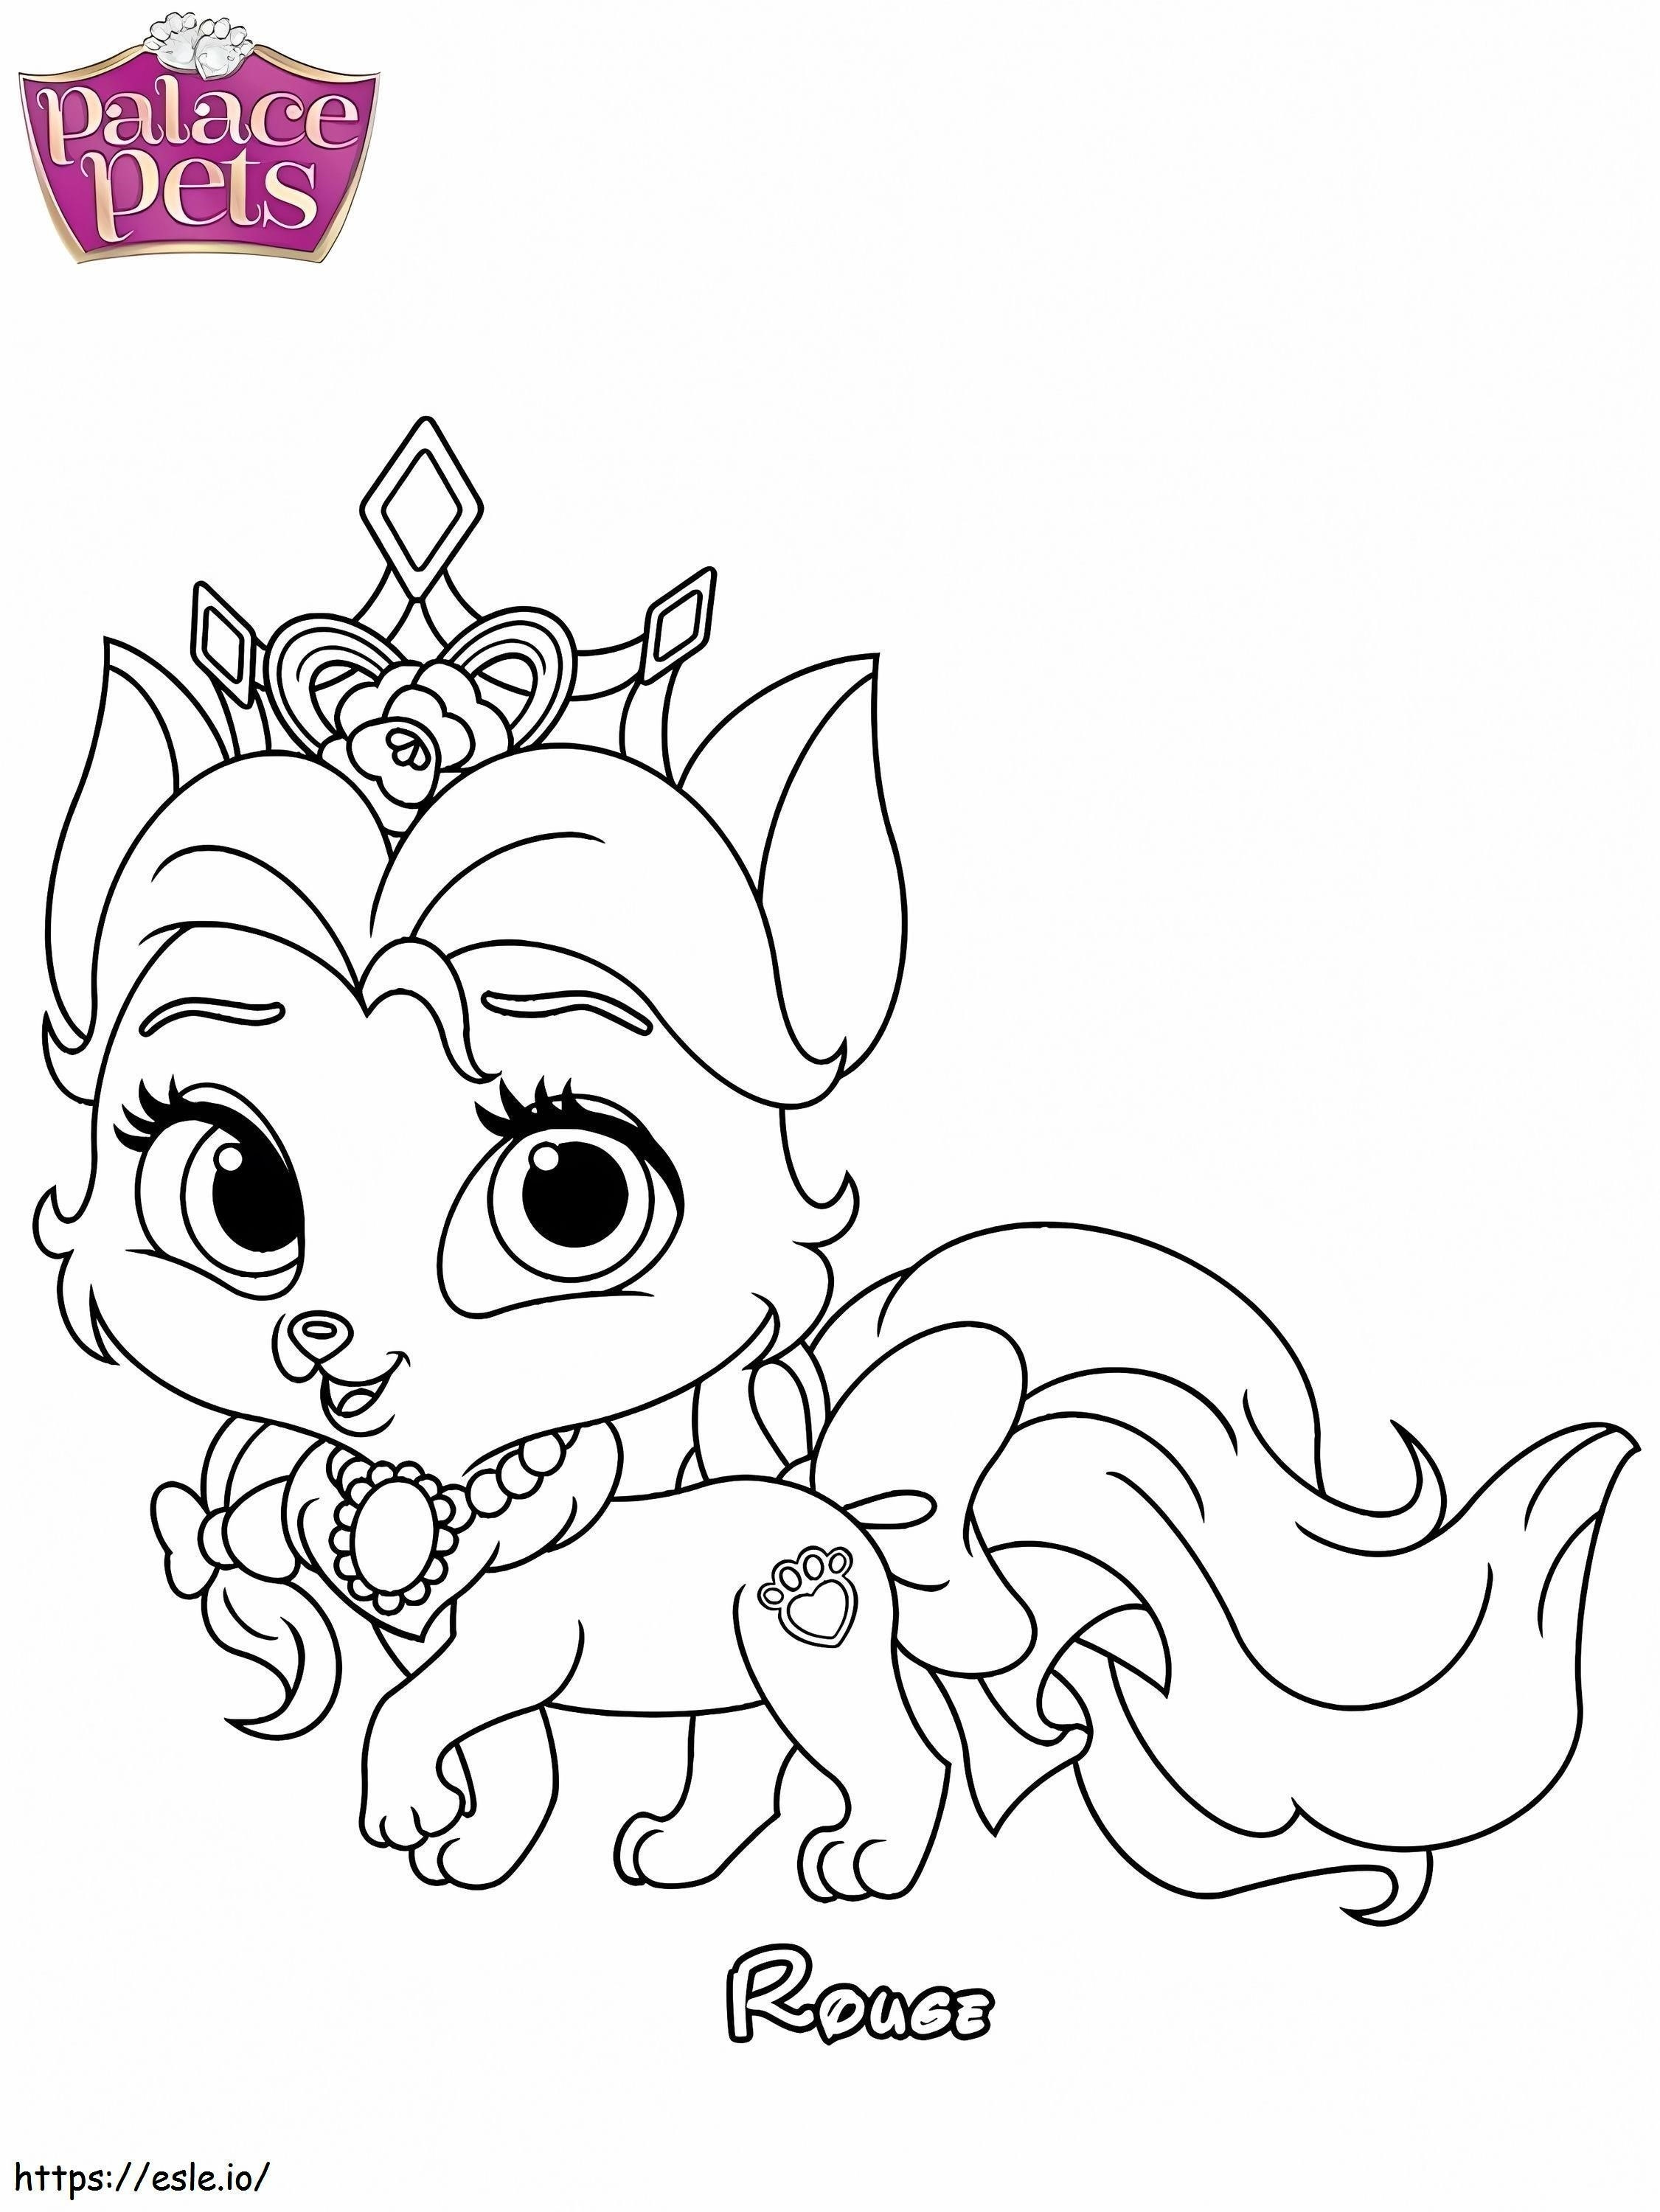 1587087590 Palace Pets Rouge coloring page